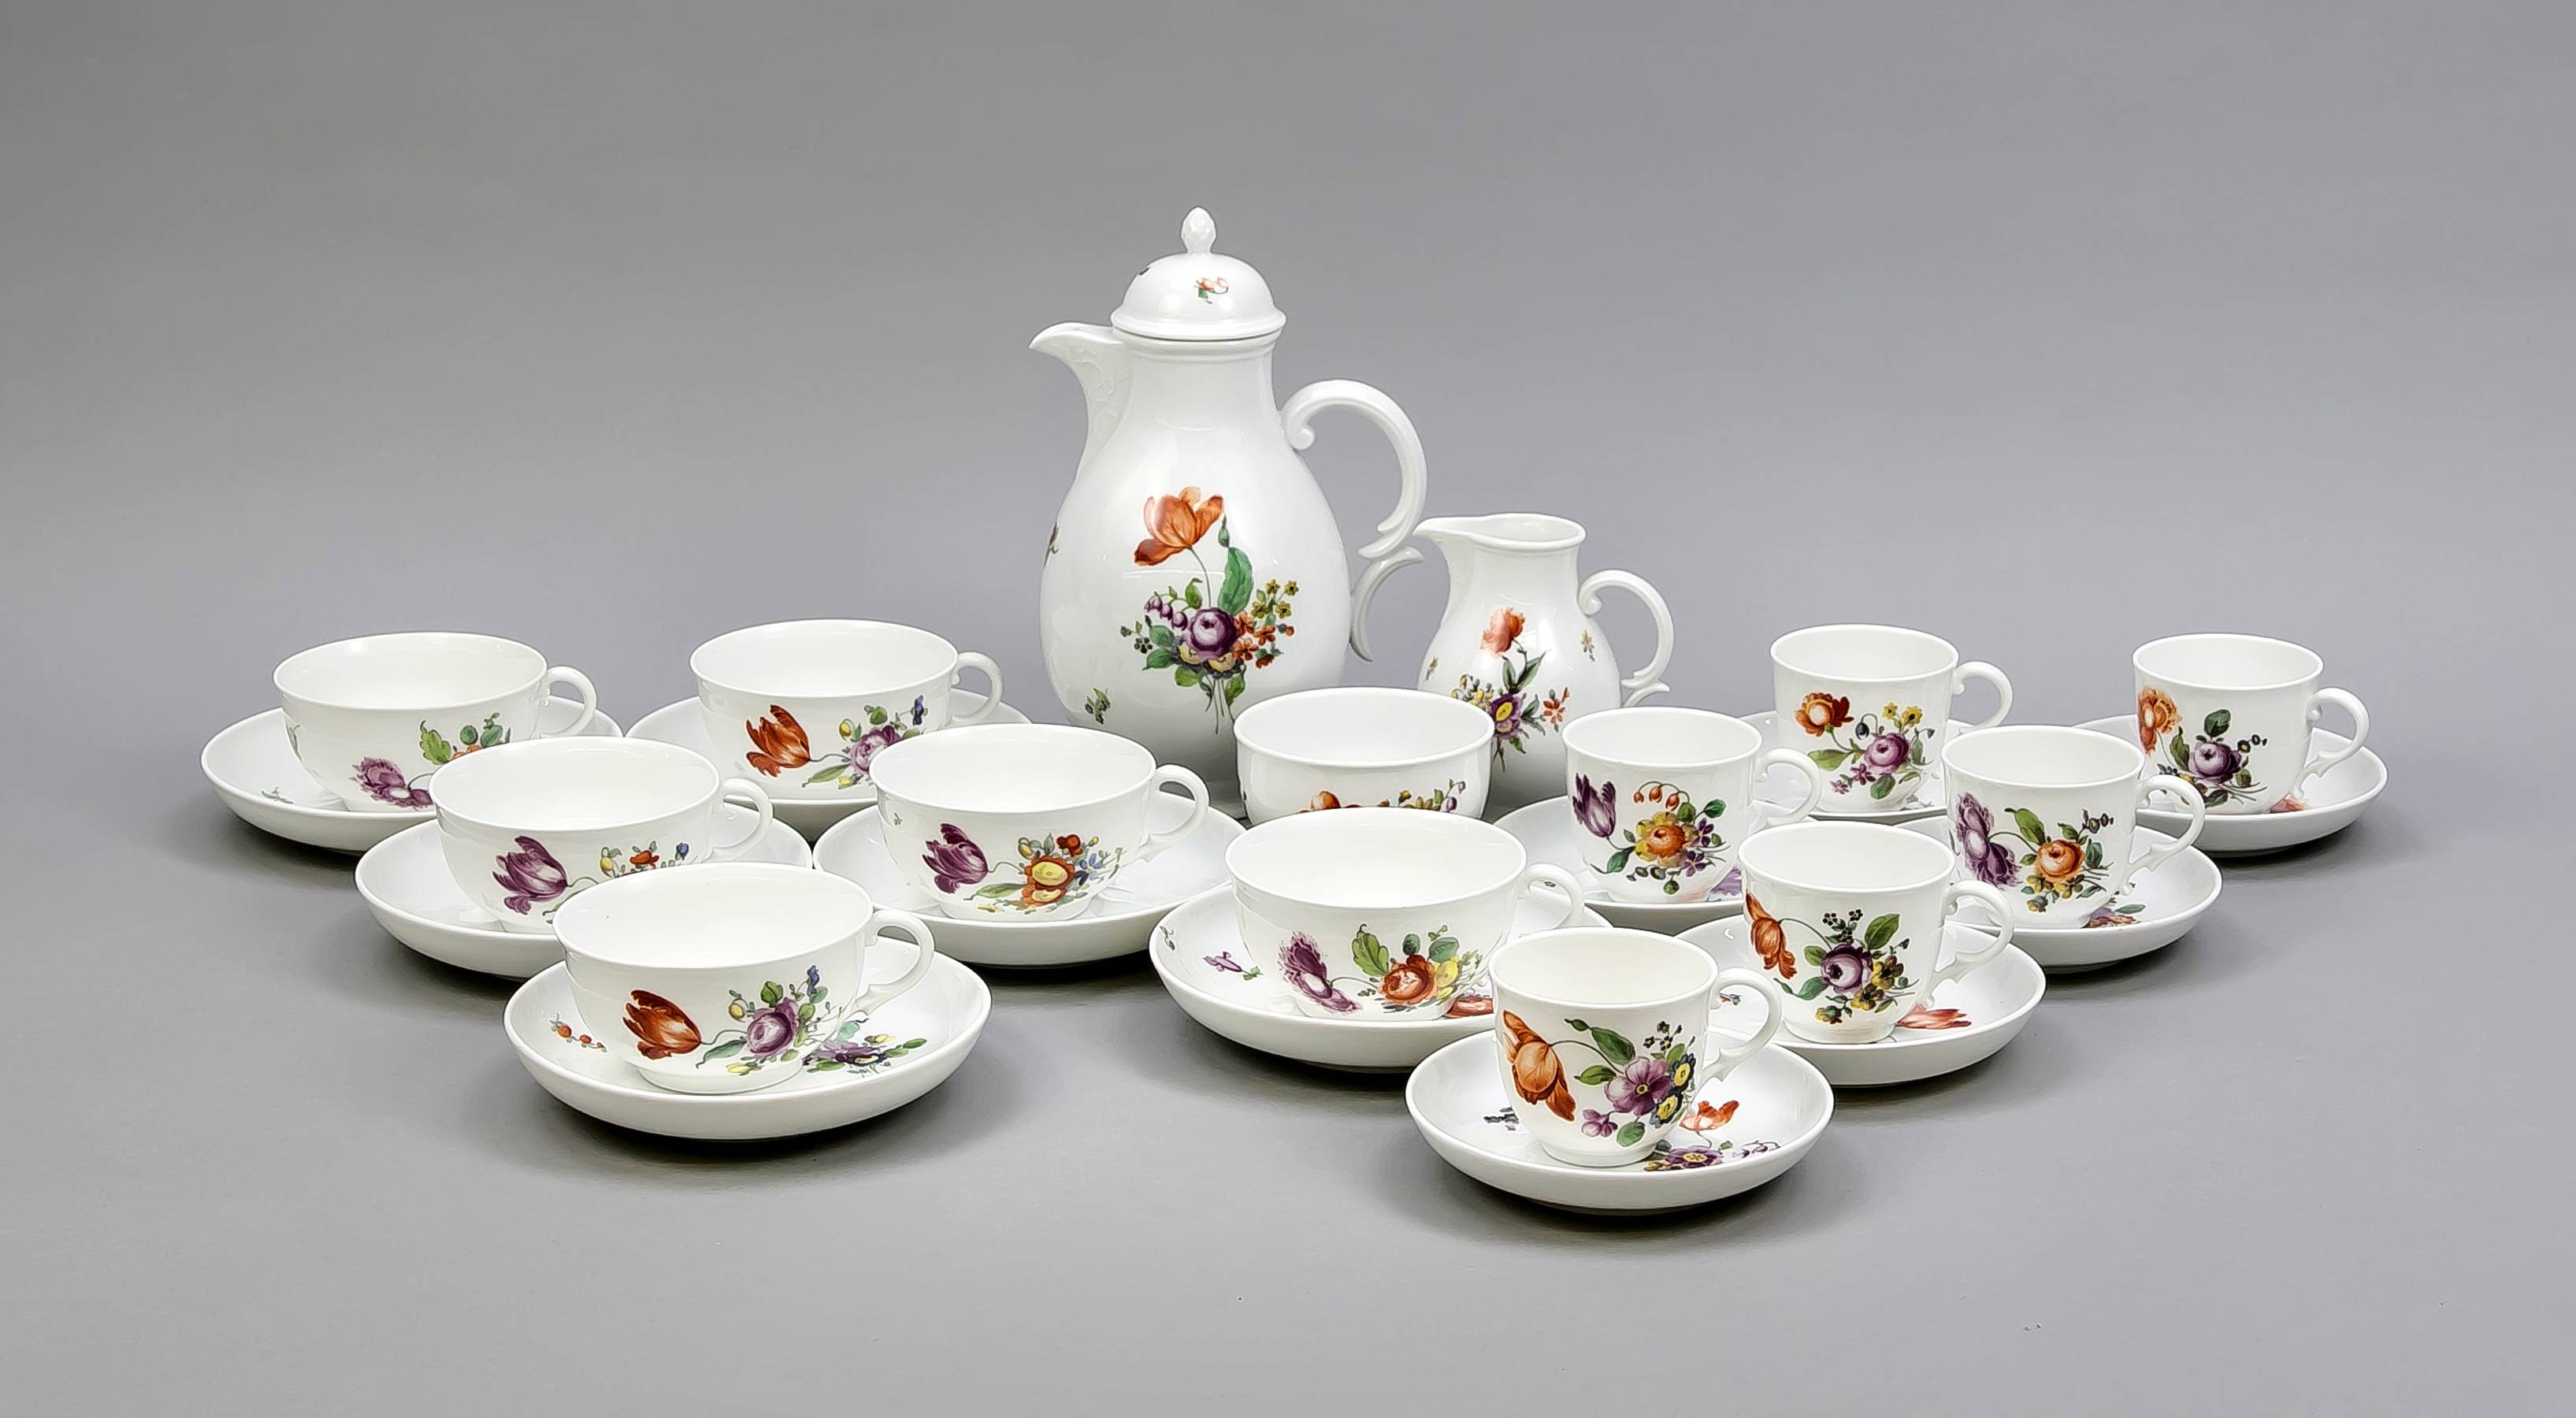 Coffee / tea set for 6 persons, 27 pcs., Nymphenburg, mark 1925-75, polychromatic flower